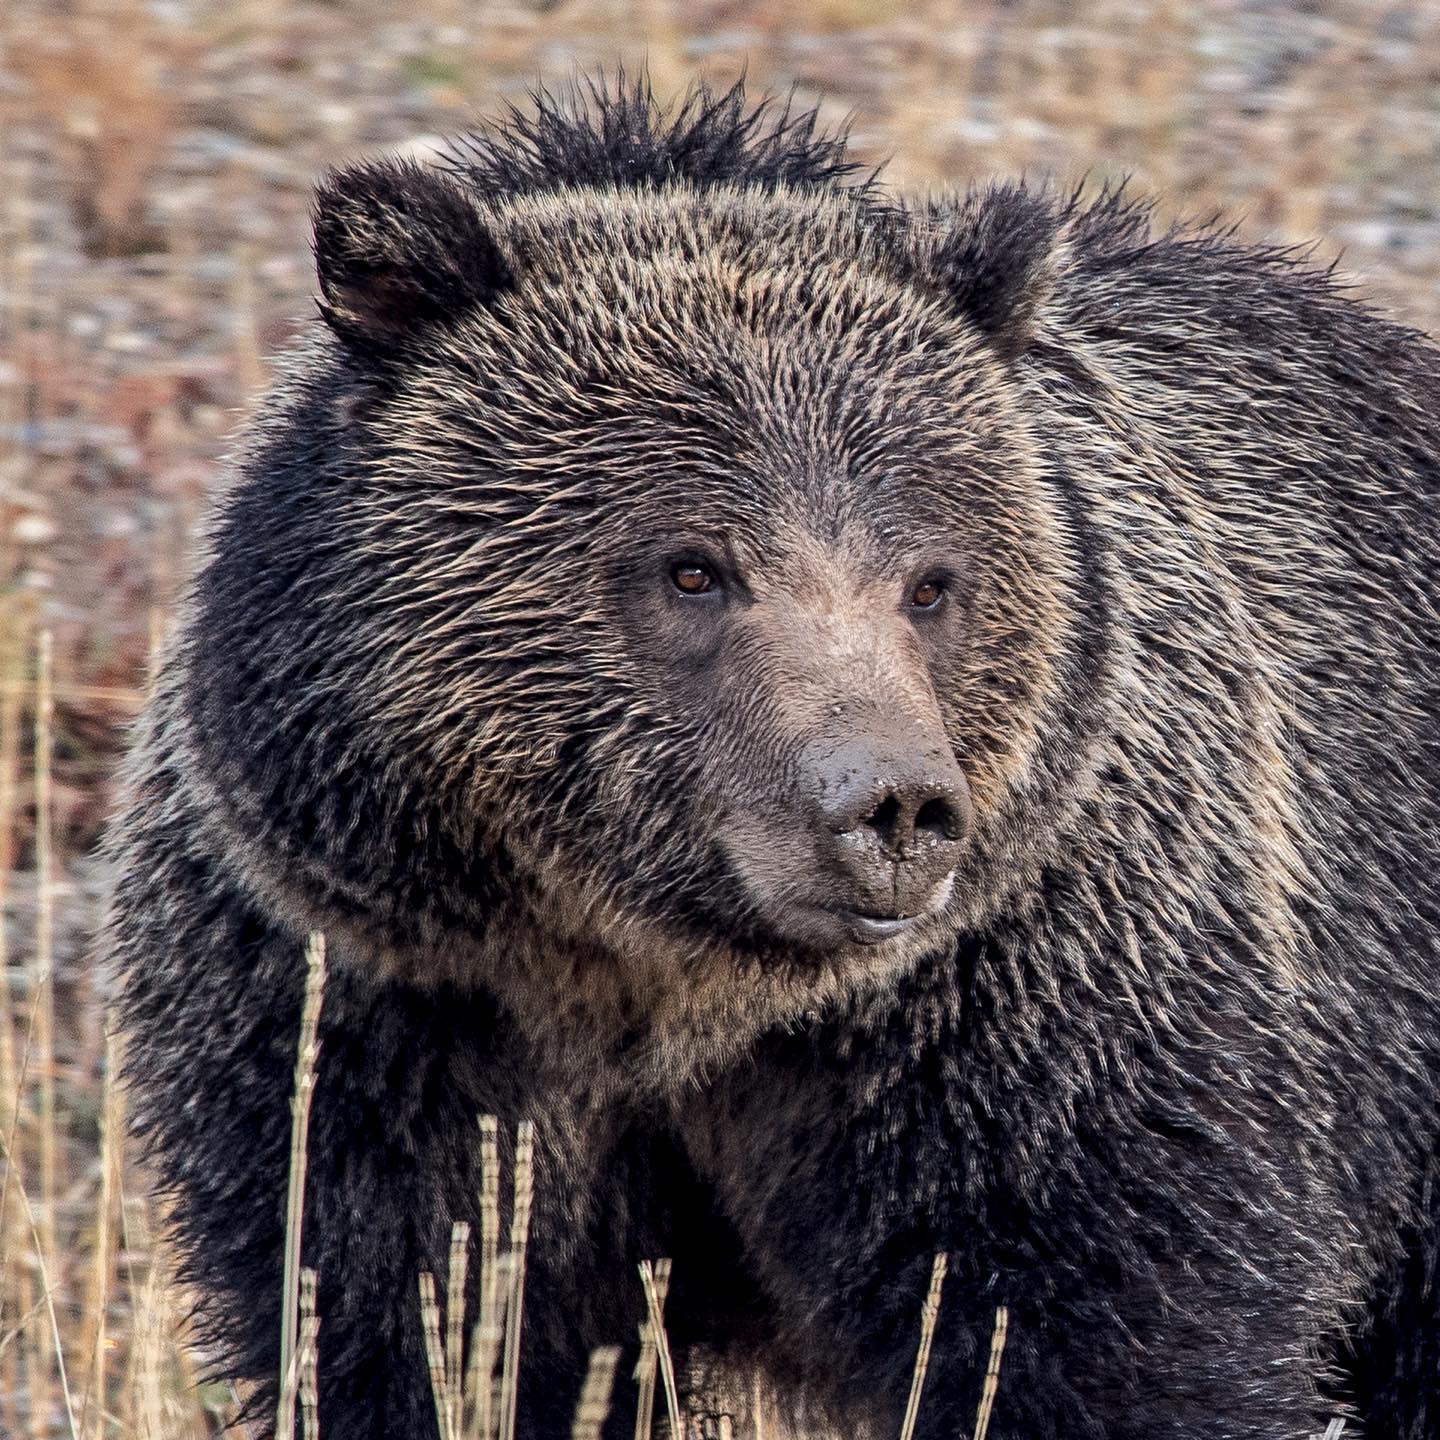 Silver Tip Grizzly Bear photographed by Cindy Orcutt just outside Yellowstone National Park. We watched it digging for a food source and from the mud on its nose and the contented look, it appears to have been a successful quest. #grizzlybear #yellowstonenationalpark #wyomingphotography #orcuttphotography